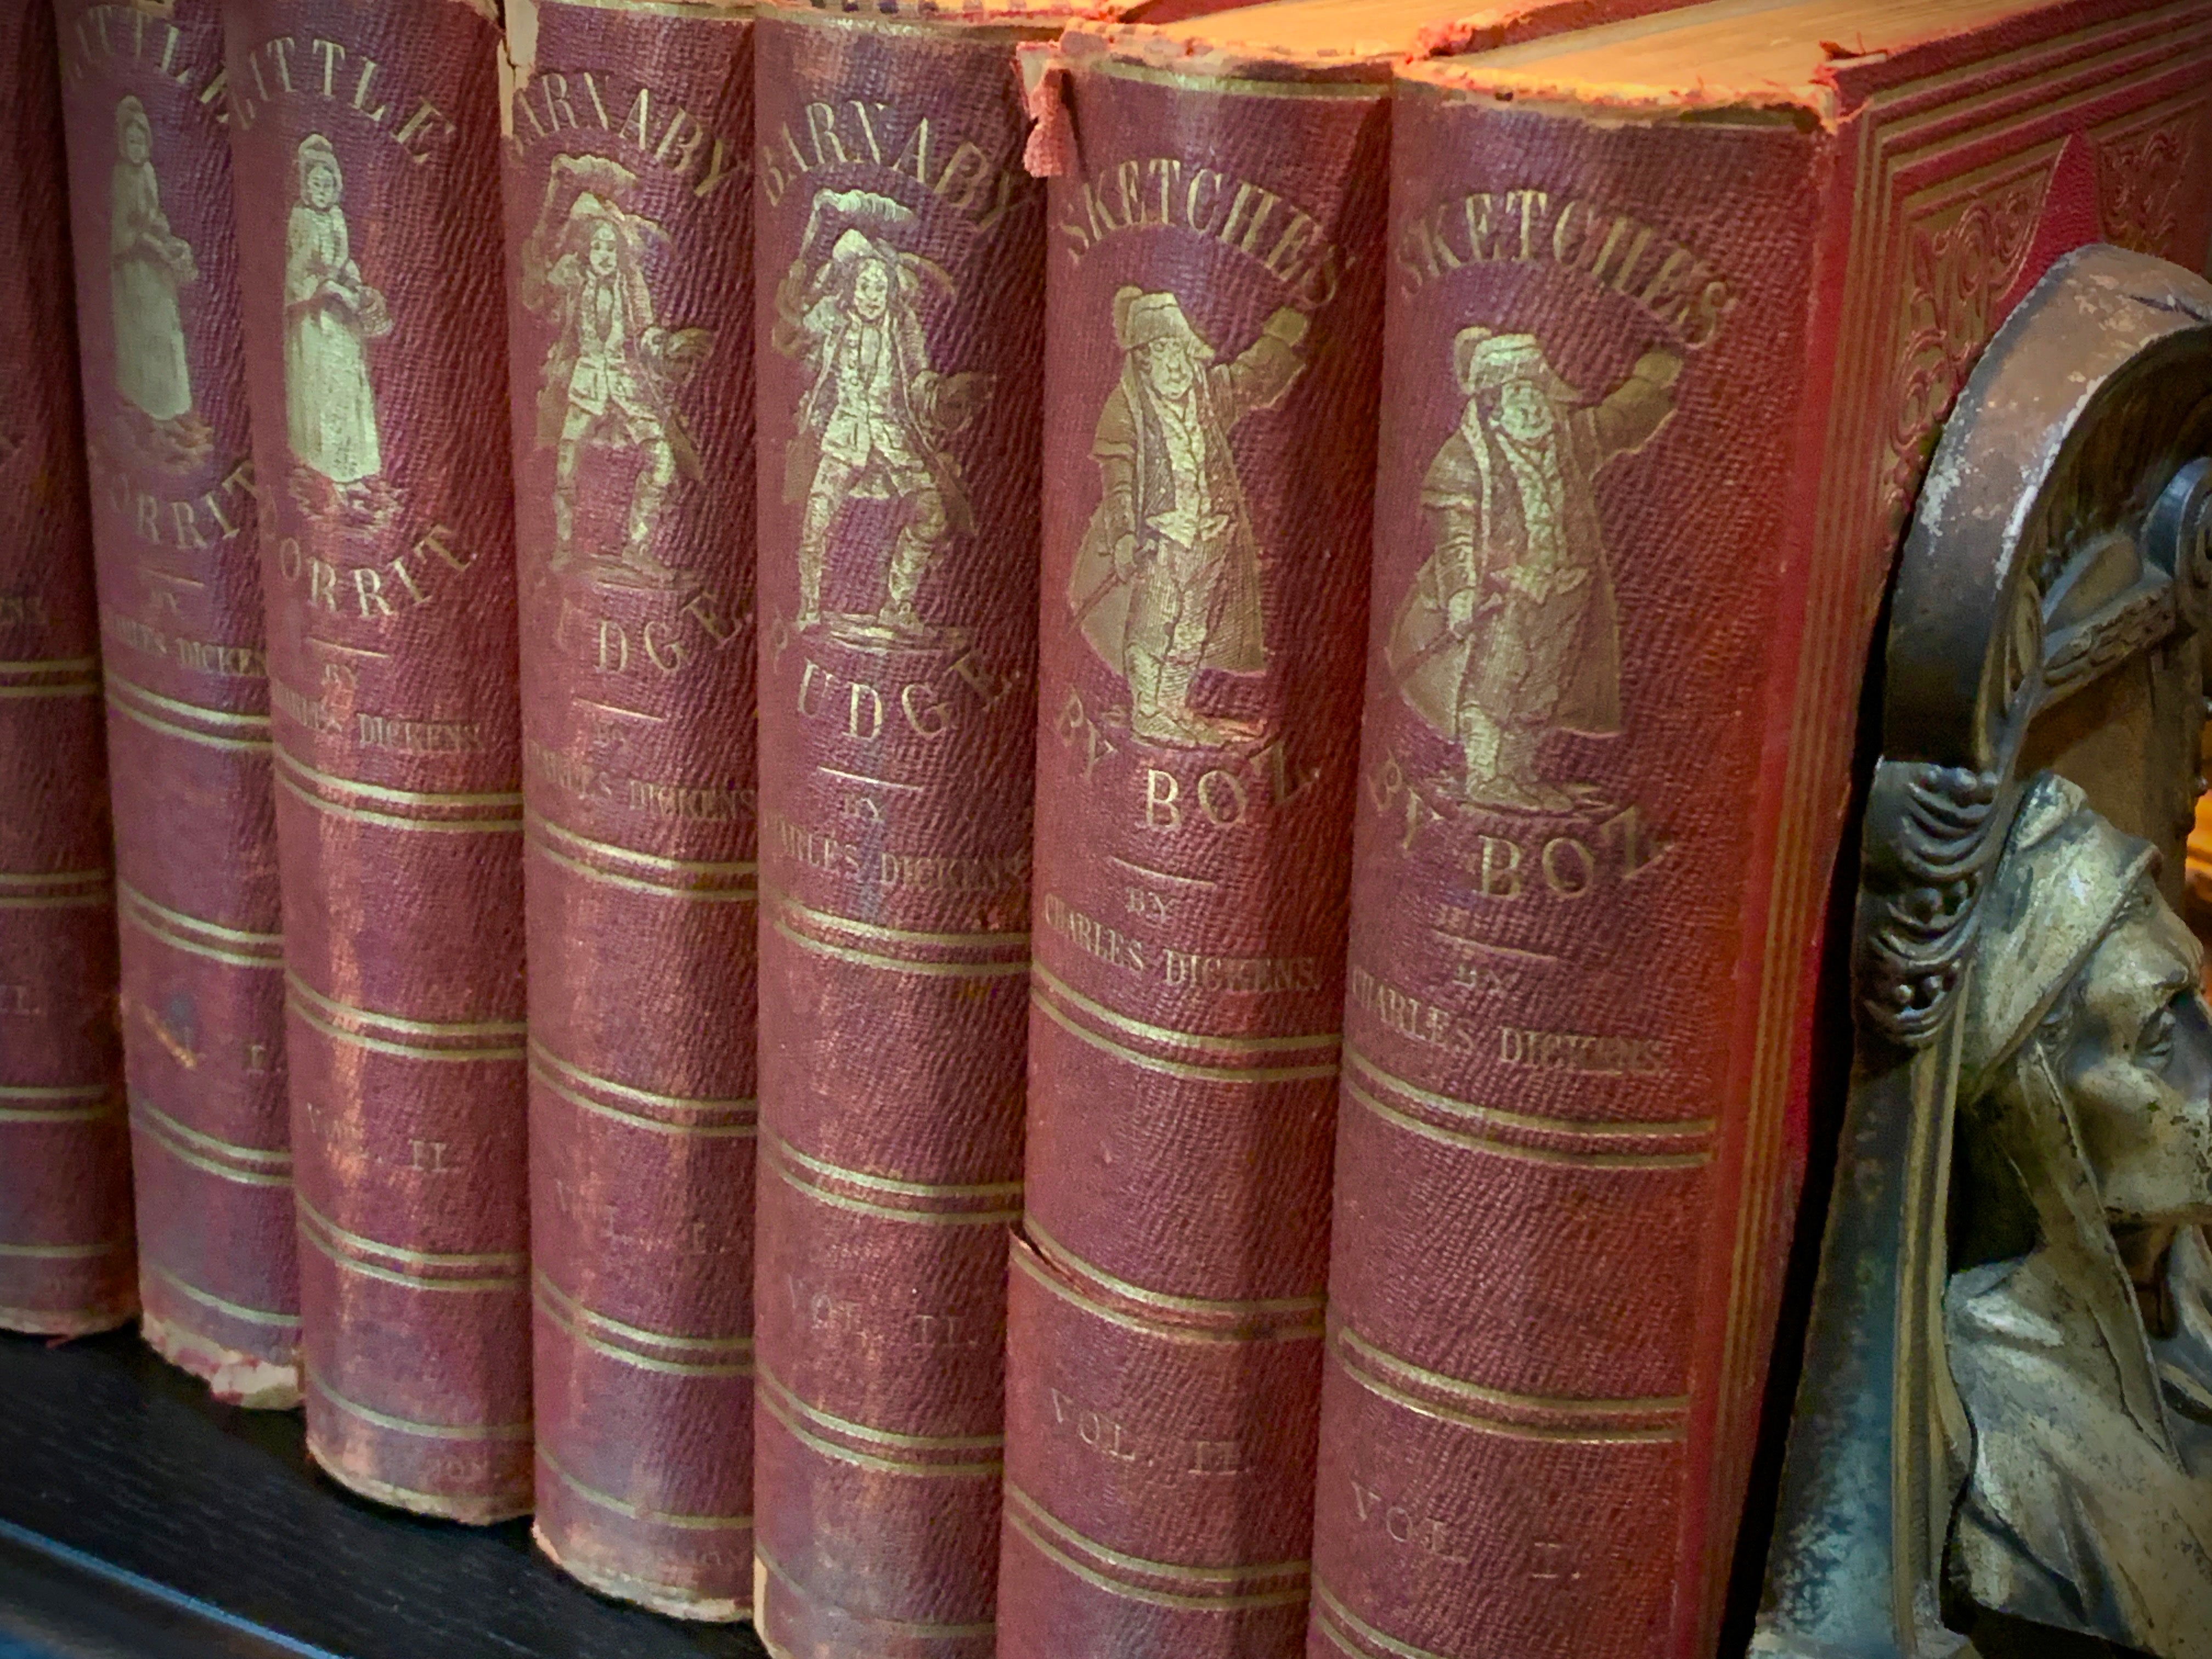 Peterson's Uniform Duodecimo Edition of the Complete Works of Charles Dickens, 14 Vols, Rare, Illustrated, c1840s, Philadelphia